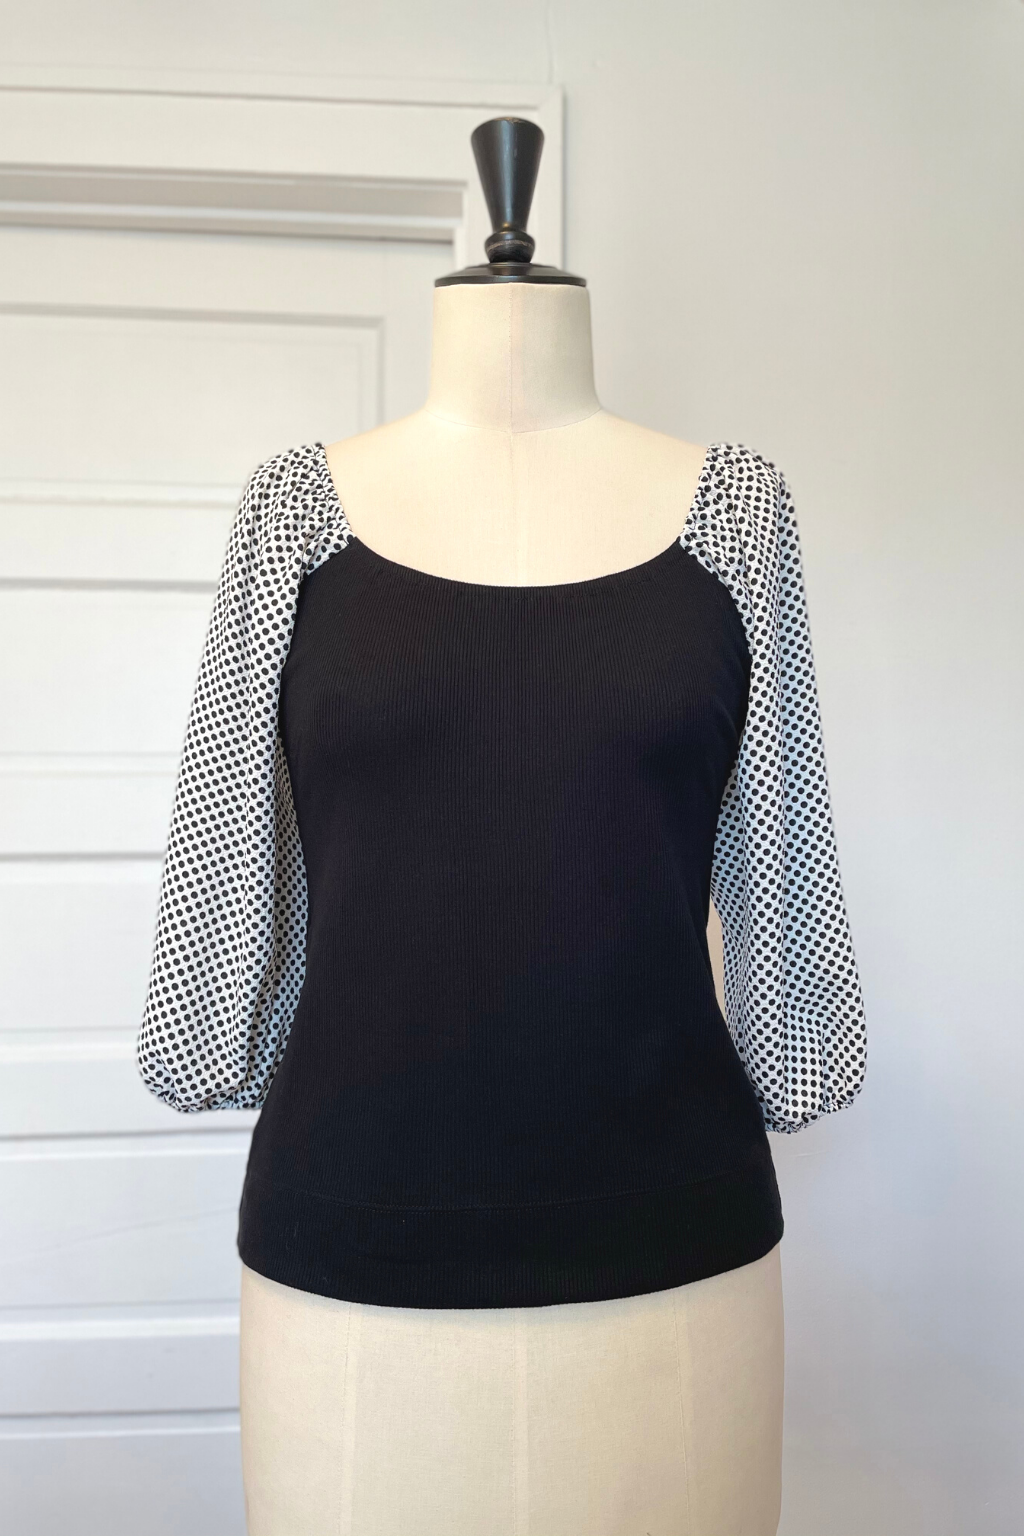 KOKOON Hutton Square Neck Top in Black Rib Knit With White and Black Polka Dot Sleeves Front